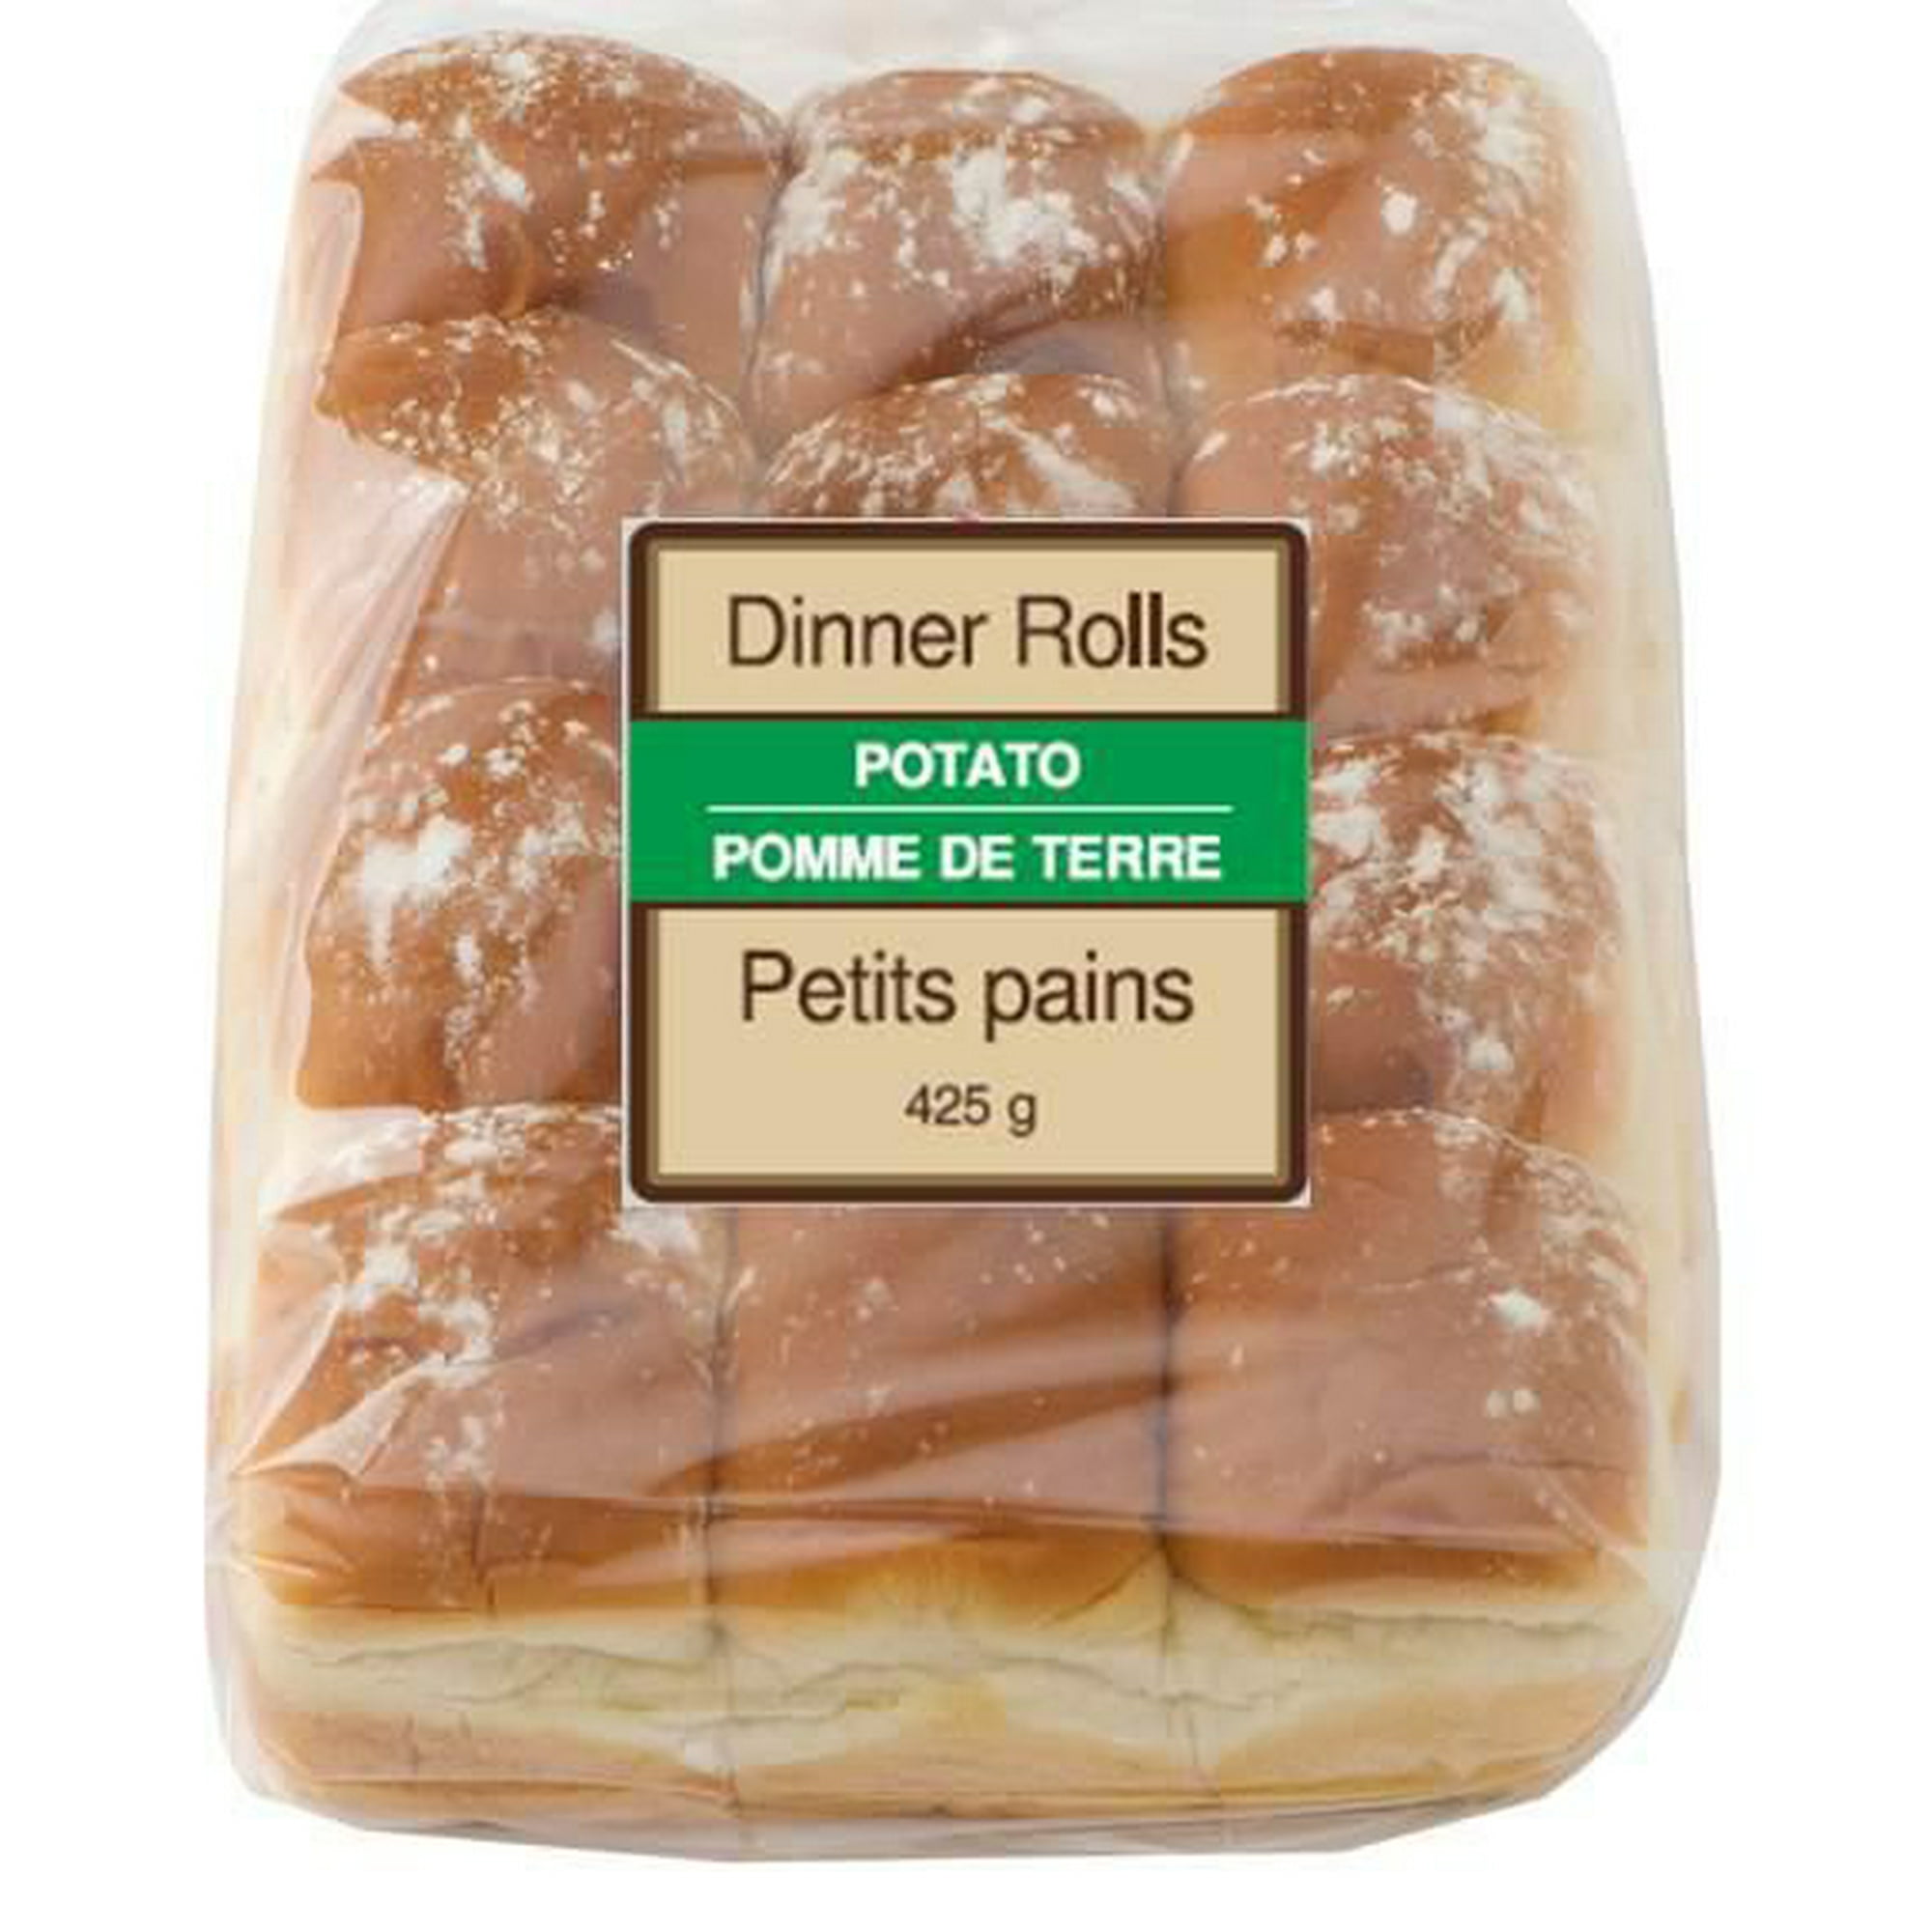 Food for Parties, Showers, and Special Occasions - Martin's Famous Potato  Rolls and Bread